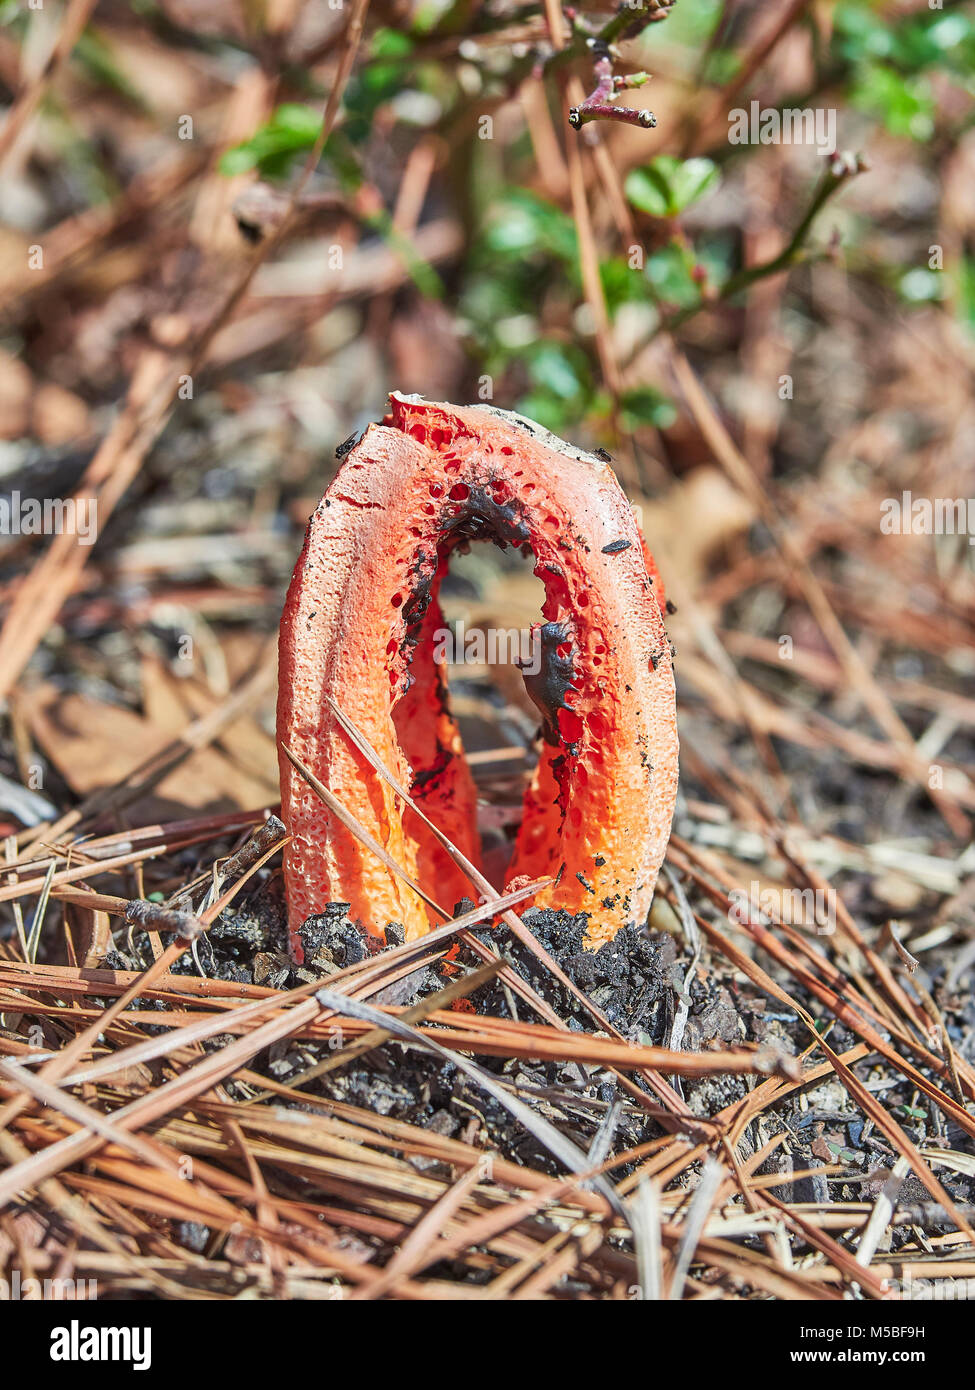 Clathrus Ruber, cage stinkhorn, or basket stinkhorn fungus growing on forest floor, Montgomery, Alabama USA. Stock Photo